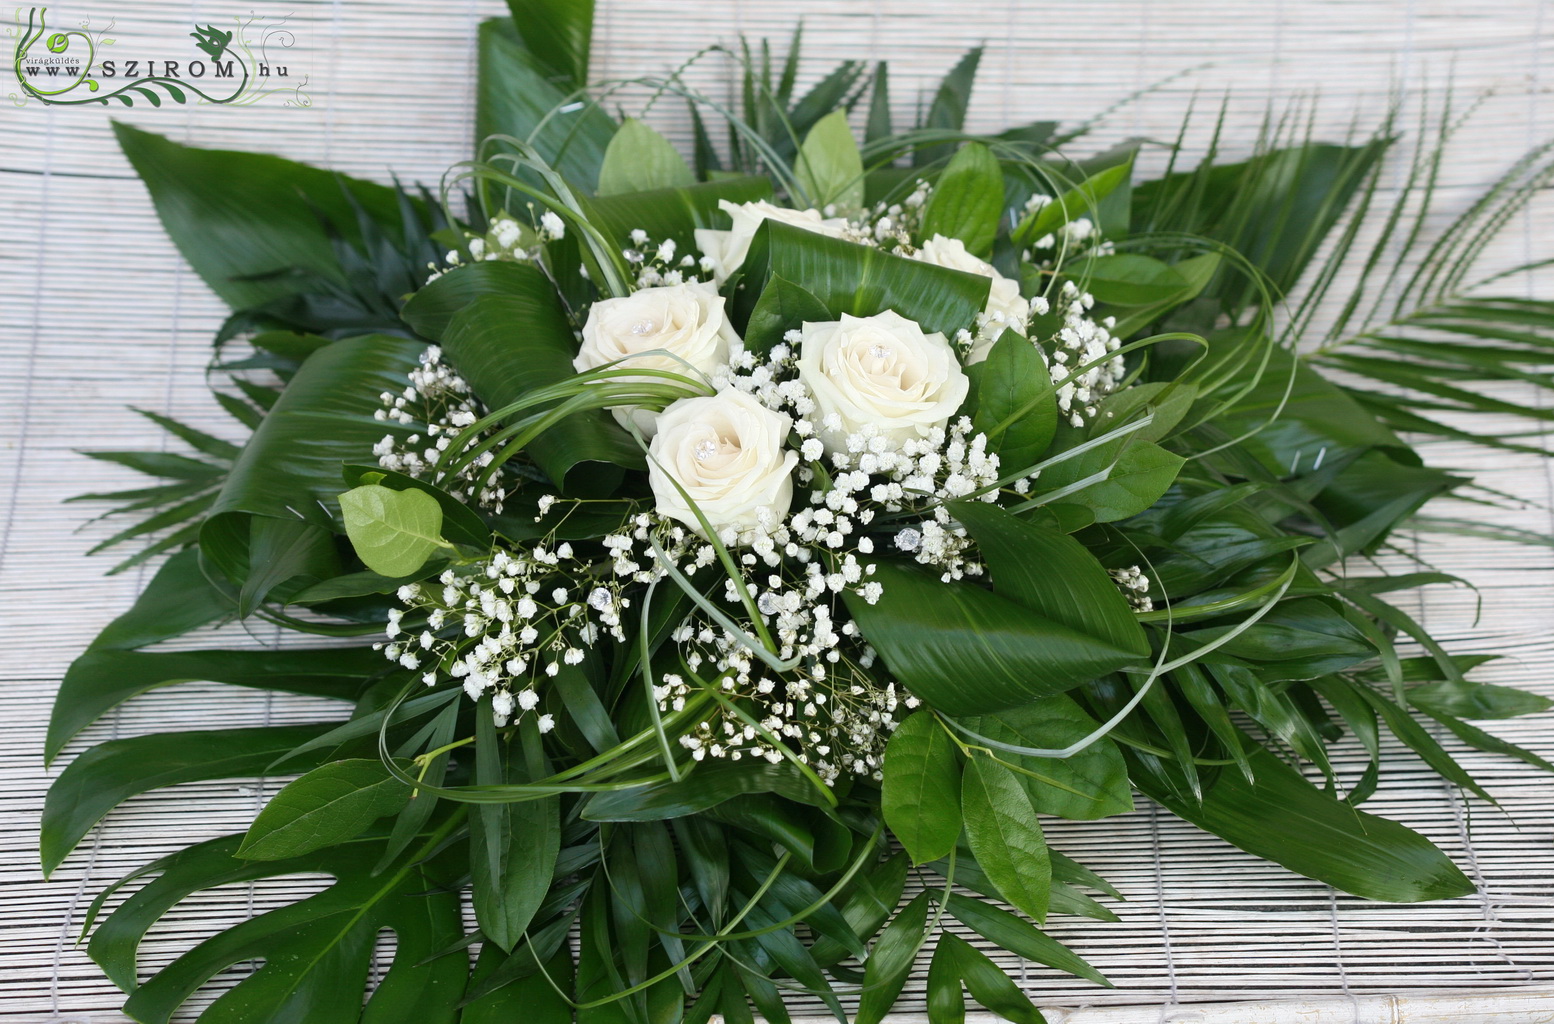 flower delivery Budapest - round car flower arrangement with lots of greenery (rose, gypsophila, white)